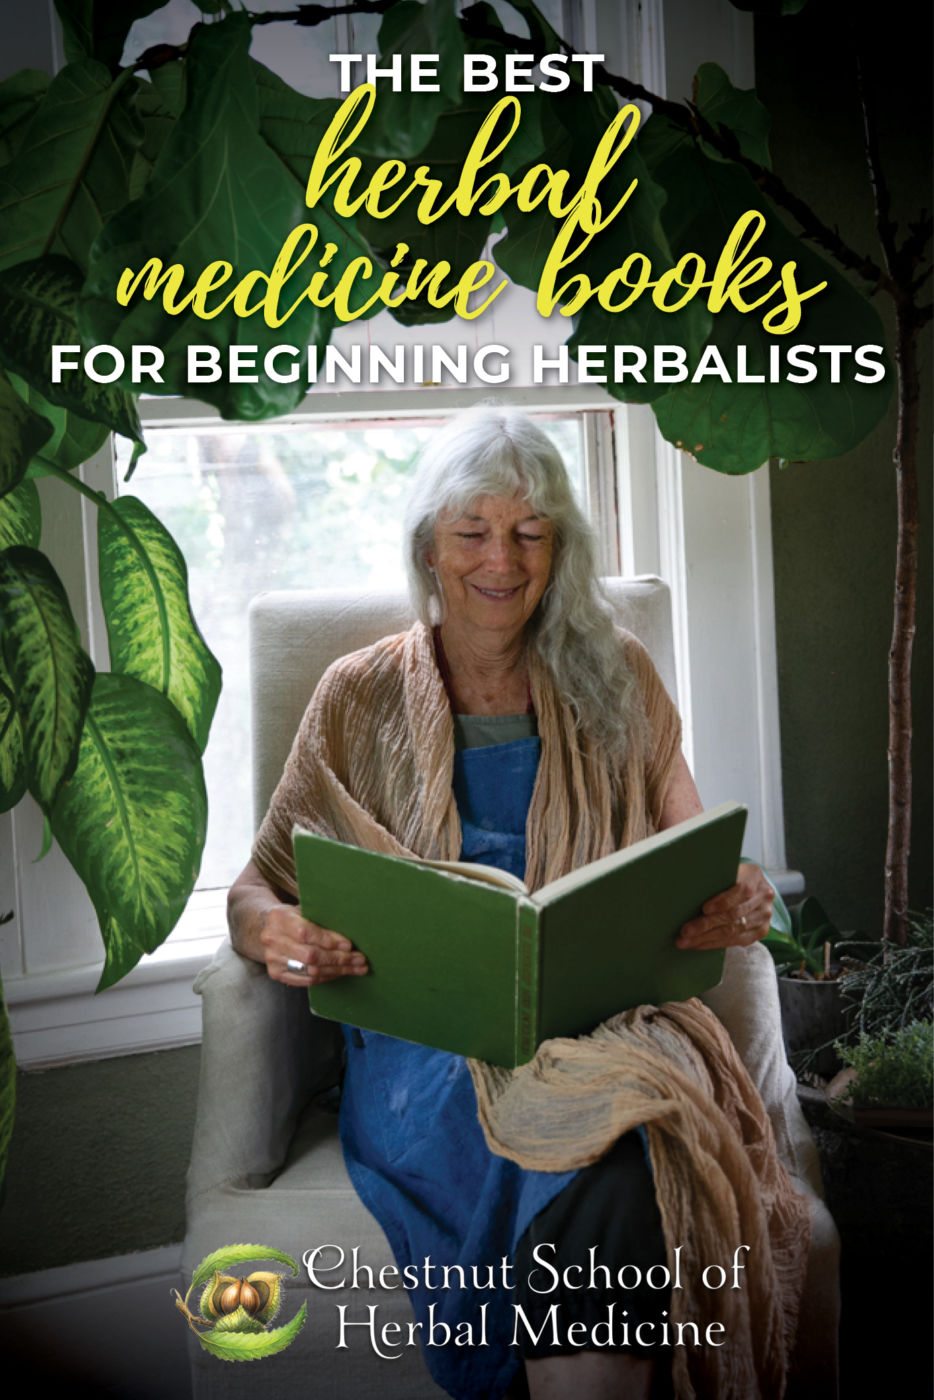 A woman sits in a chair under a plant reading one of the best herbal medicine books for herbalists.